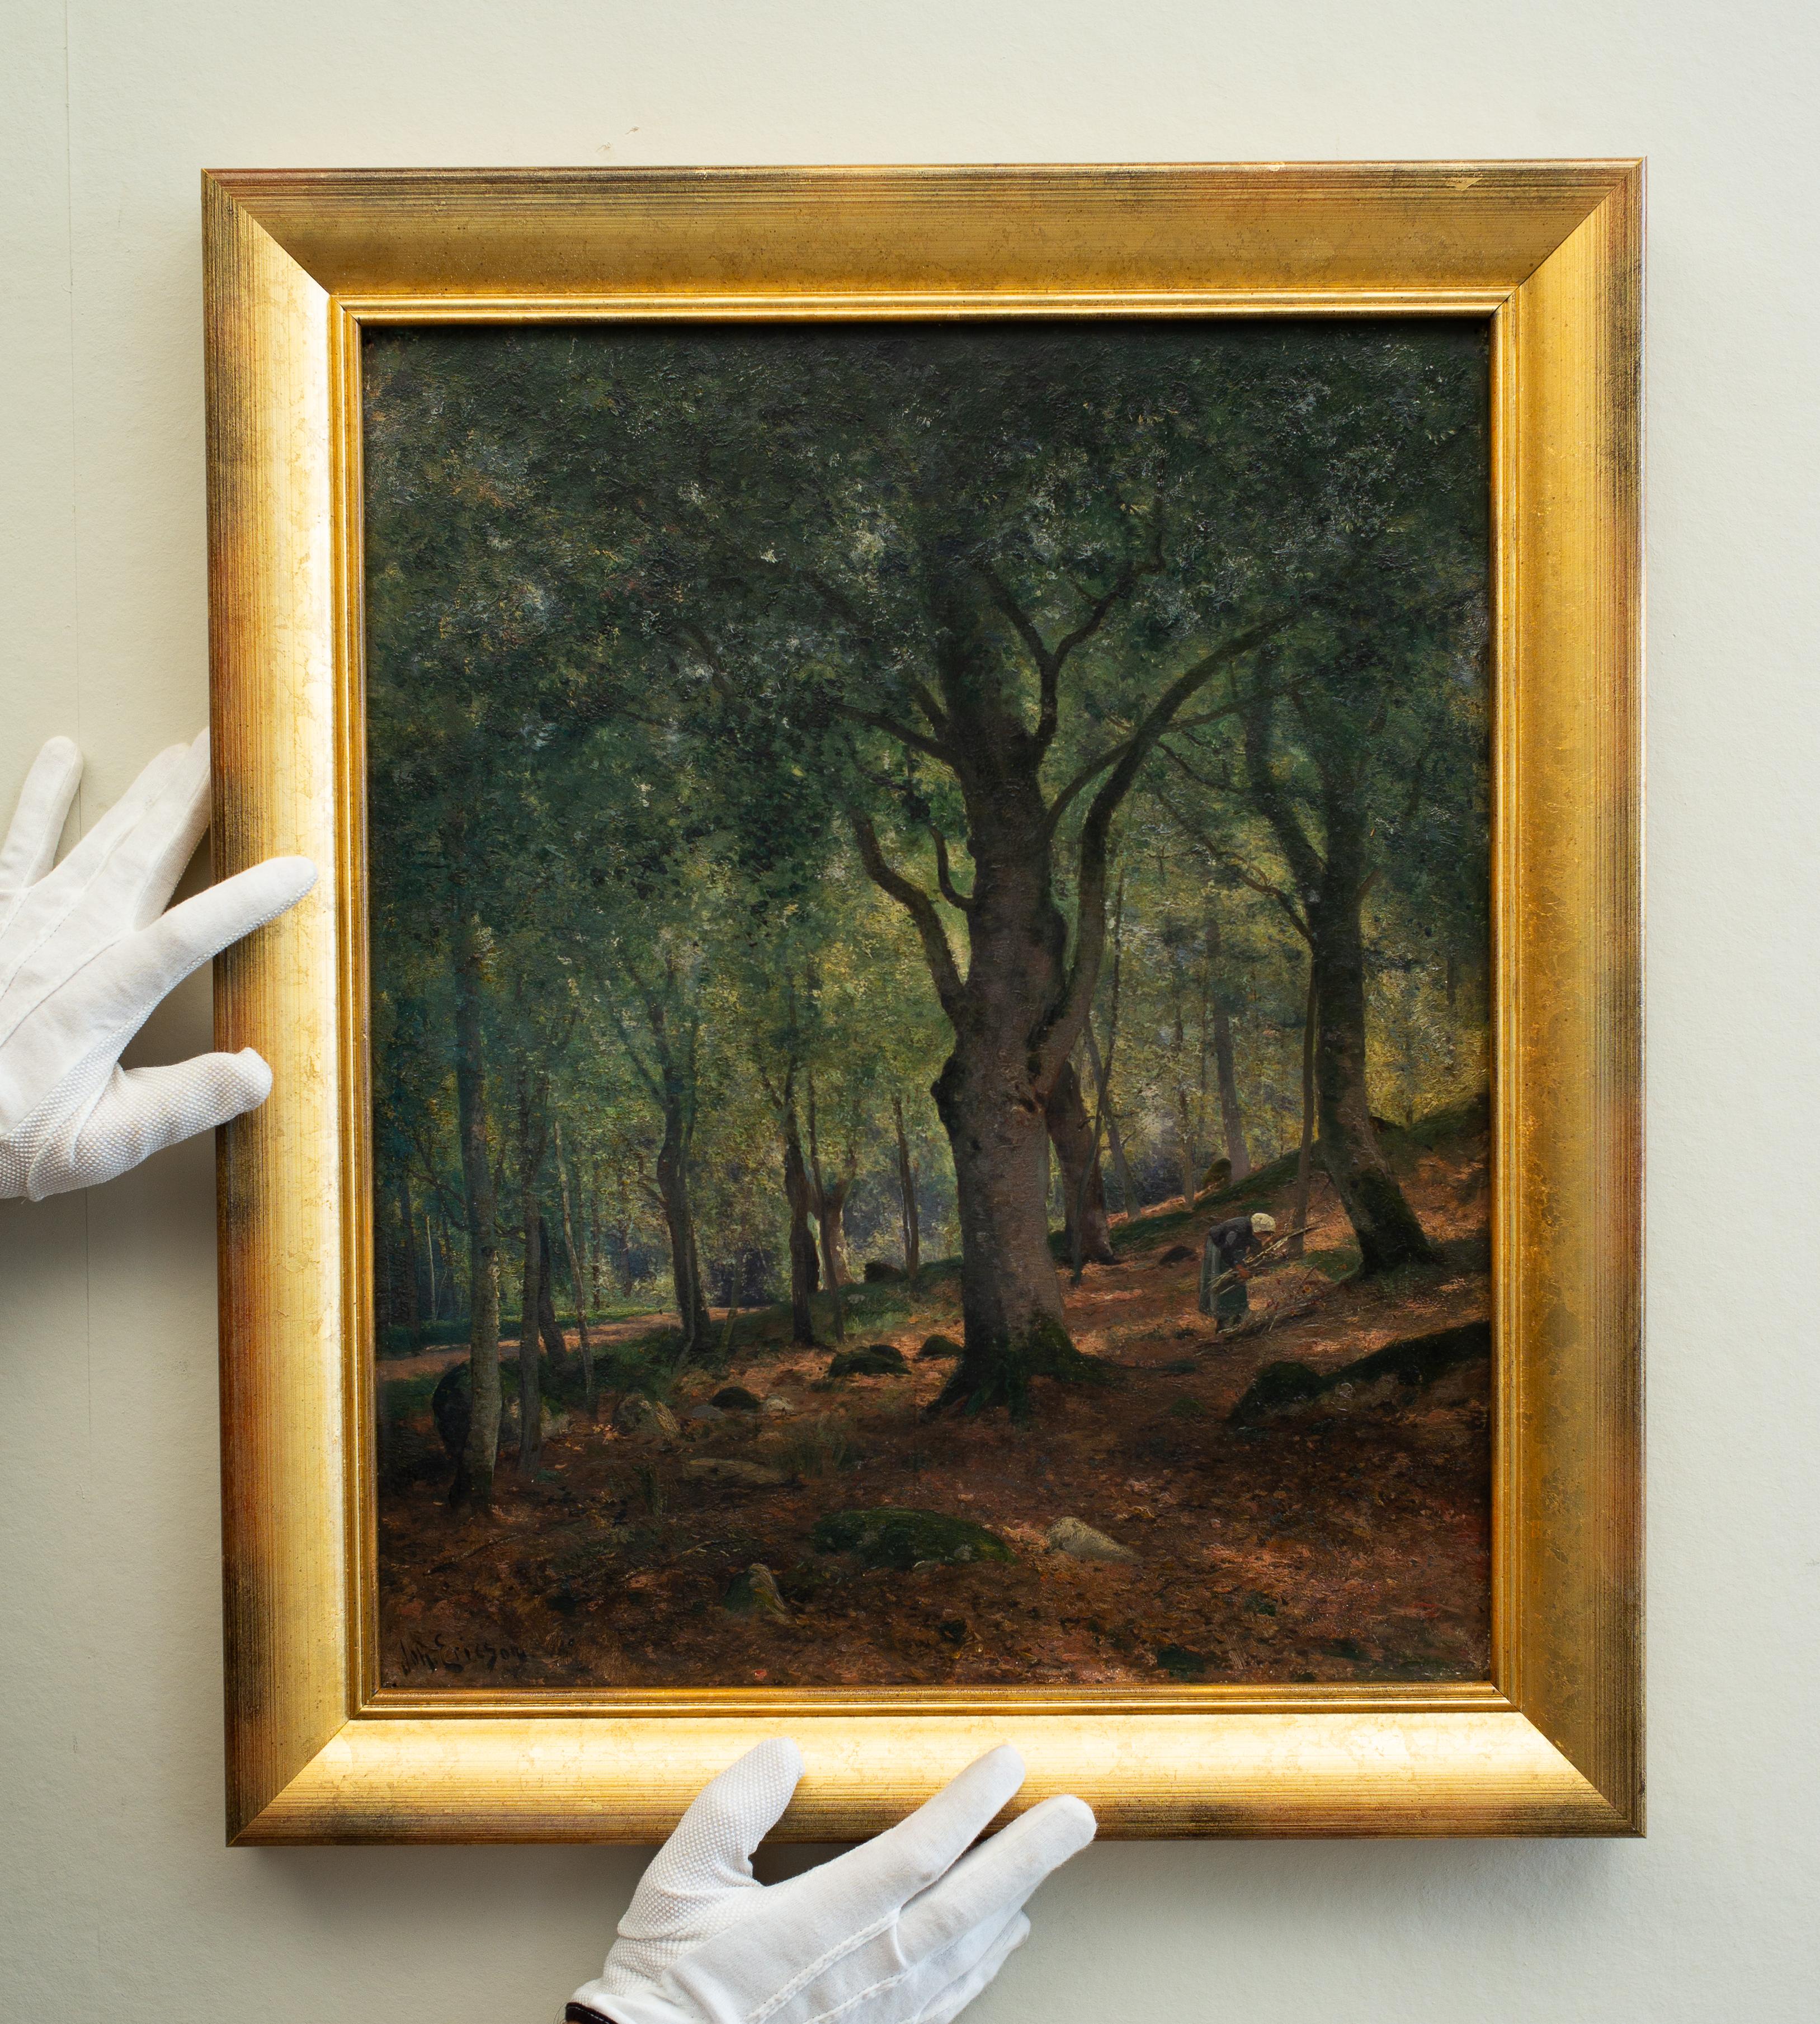 Johan Ericson (1849-1925) Swedish

The Forest of Fontainebleau, c.1878

oil on panel
signed Joh.Ericson
painted c.1878
panel dimensions 21.65 x 17.32 inches (55 x 44 cm)
frame 25.59 x 22 inches (65 x 56 cm)


Provenance:
A Swedish private